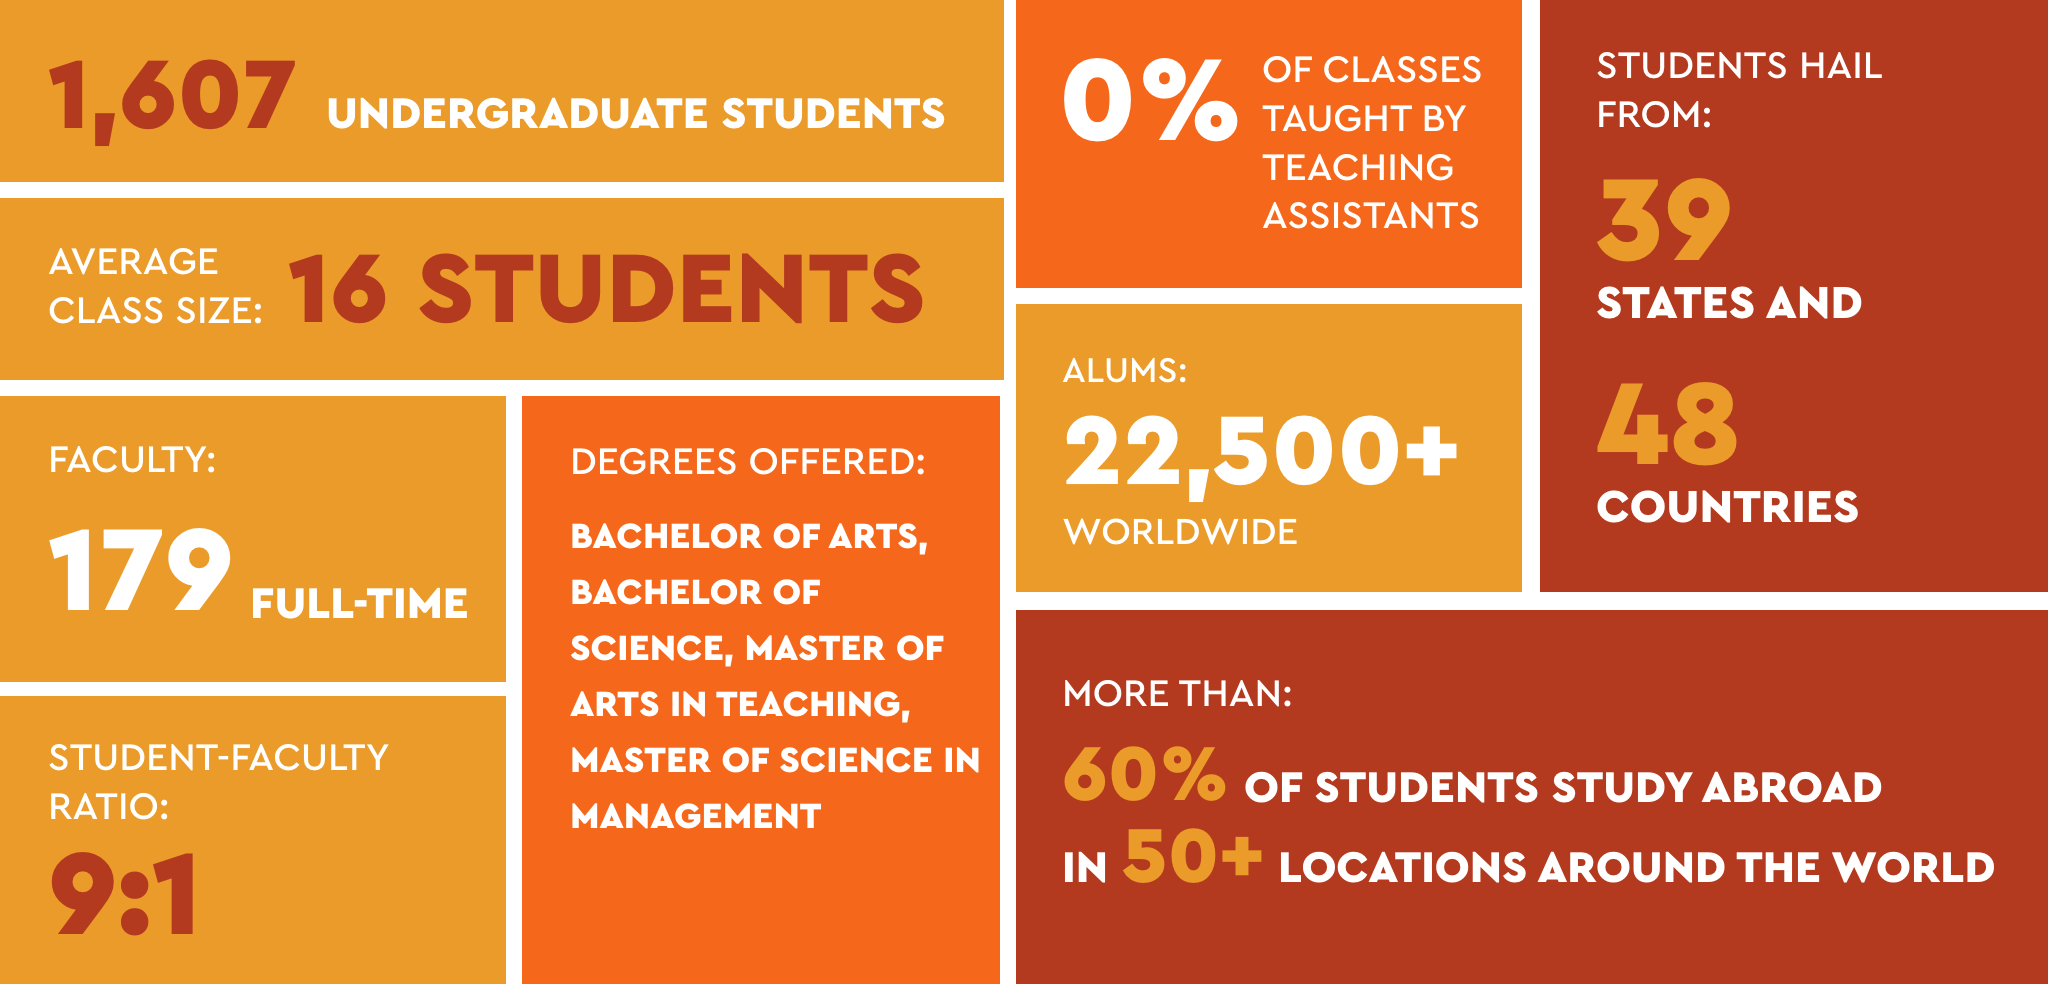 1,607 undergraduate students; 0% of classes taught by teaching assistants; Students hail from 39 states and 48 countries; Average class size is 16 students; 22,500+ alums worldwide; 179 full-time faculty; Student-faculty ratio is 9:1; Degrees offered: Bachelor of Arts, Bachelor of Science, Master of Arts in Teaching, Master of Science in Management; More than 60% of students study abroad in 50+ locations around the world